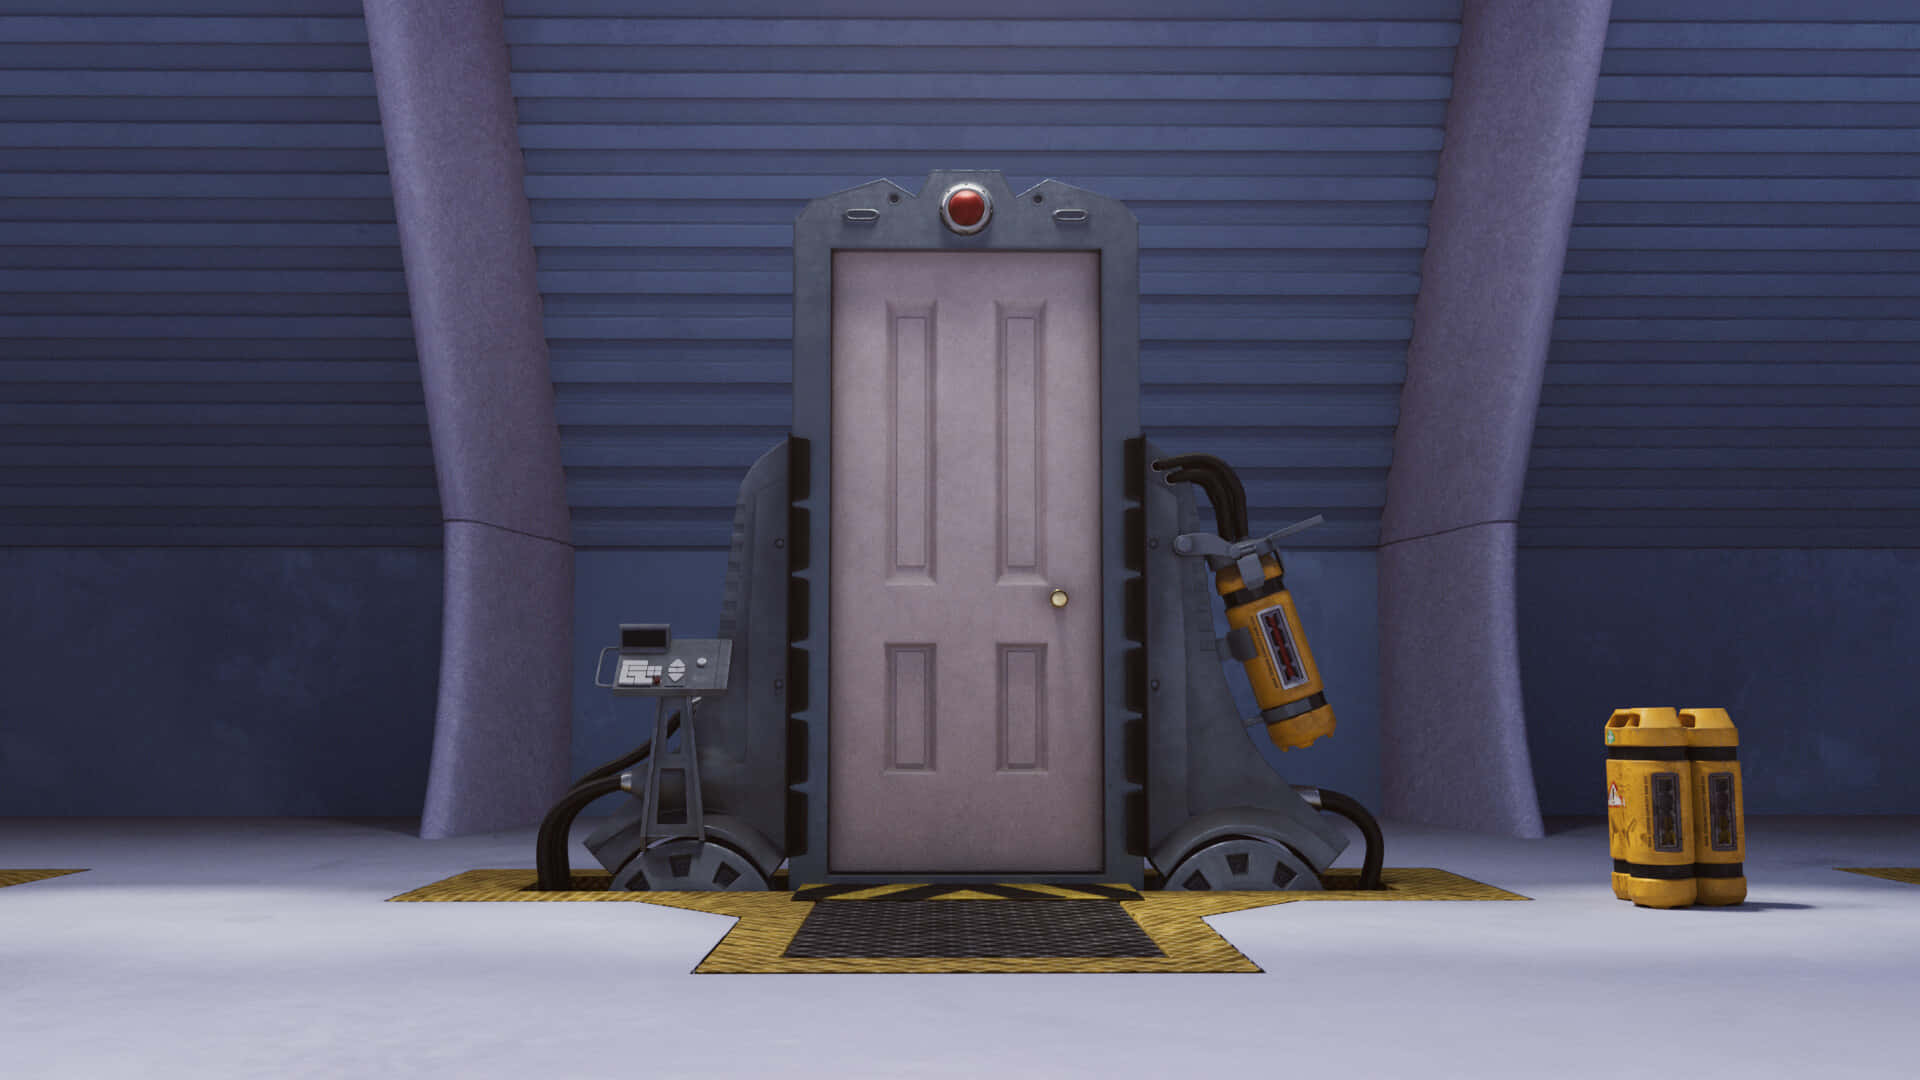 A Door In A Room With A Machine And A Bucket